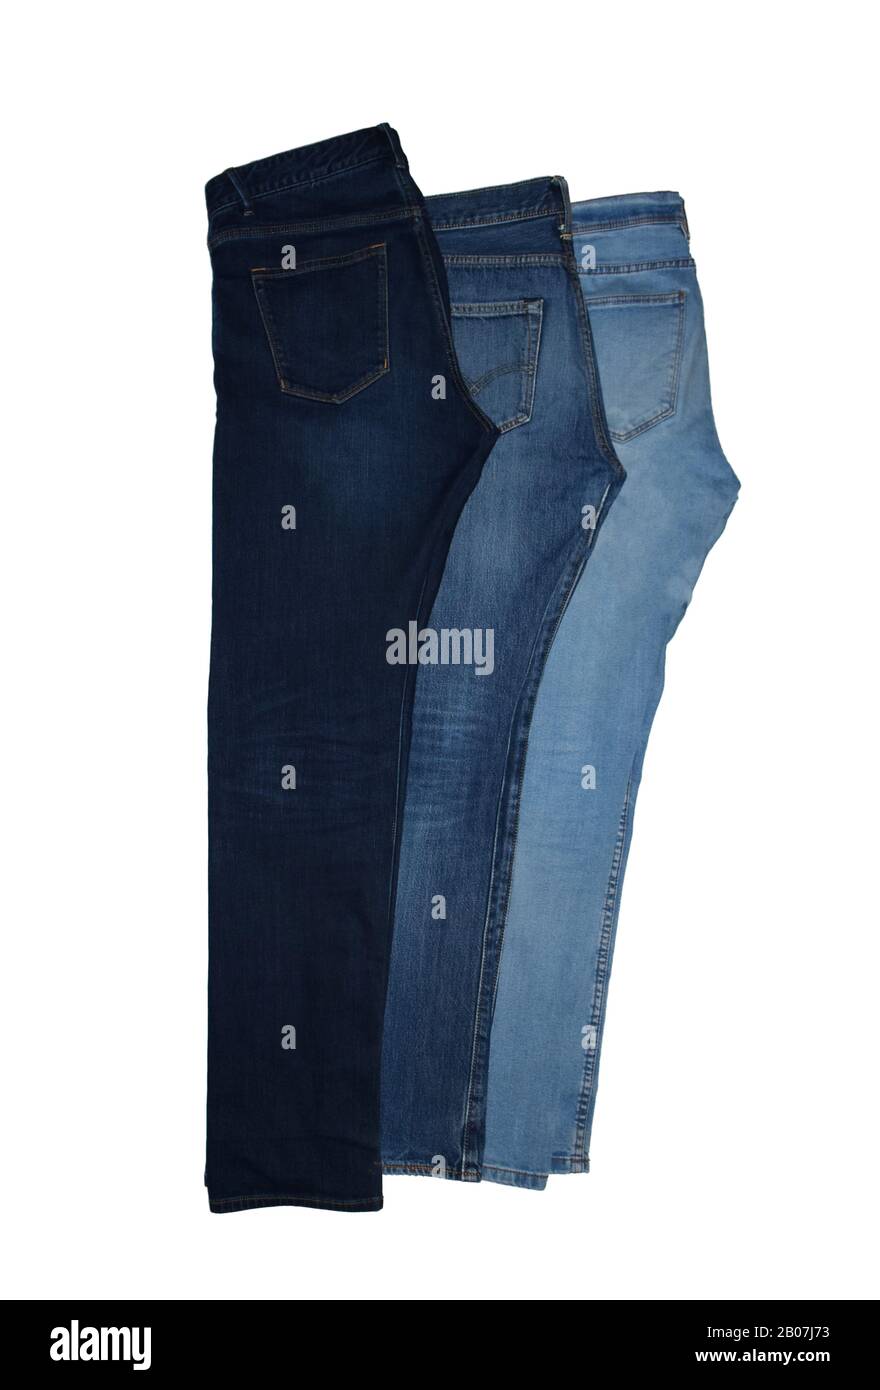 Women's Jeans High Waist Trousers Fashion Jeans Loose Hole Jeans Jean Pants  for Women Work (Blue, S) at Amazon Women's Jeans store